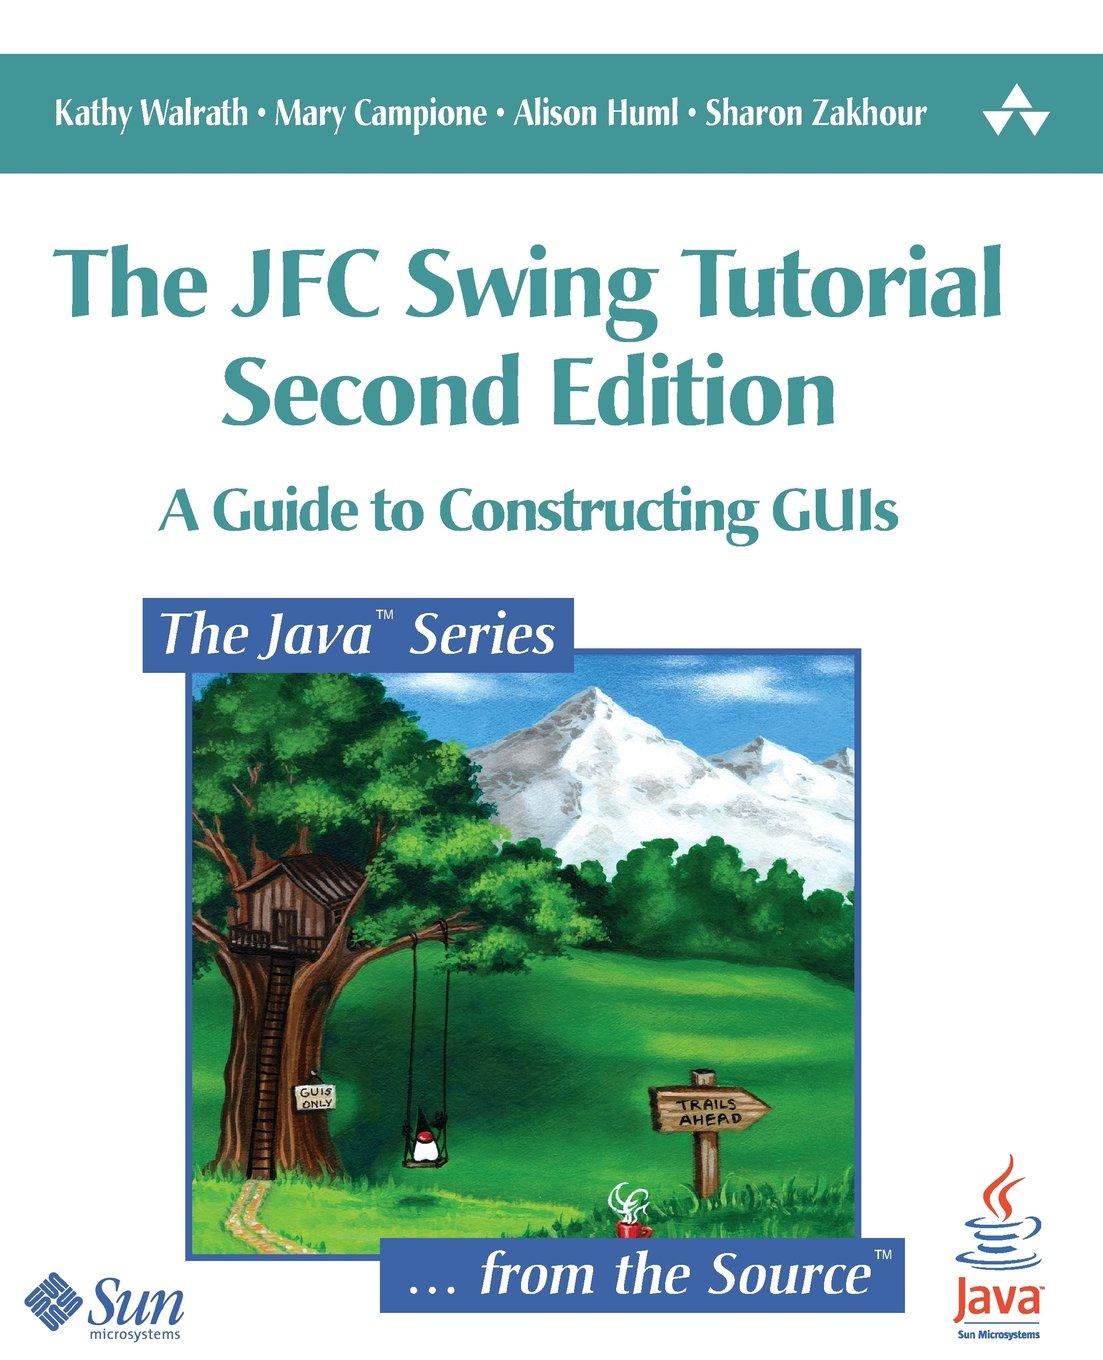 the jfc swing tutorial a guide to constructing guis 2nd edition mary campione, alison huml, sharon zakhour,